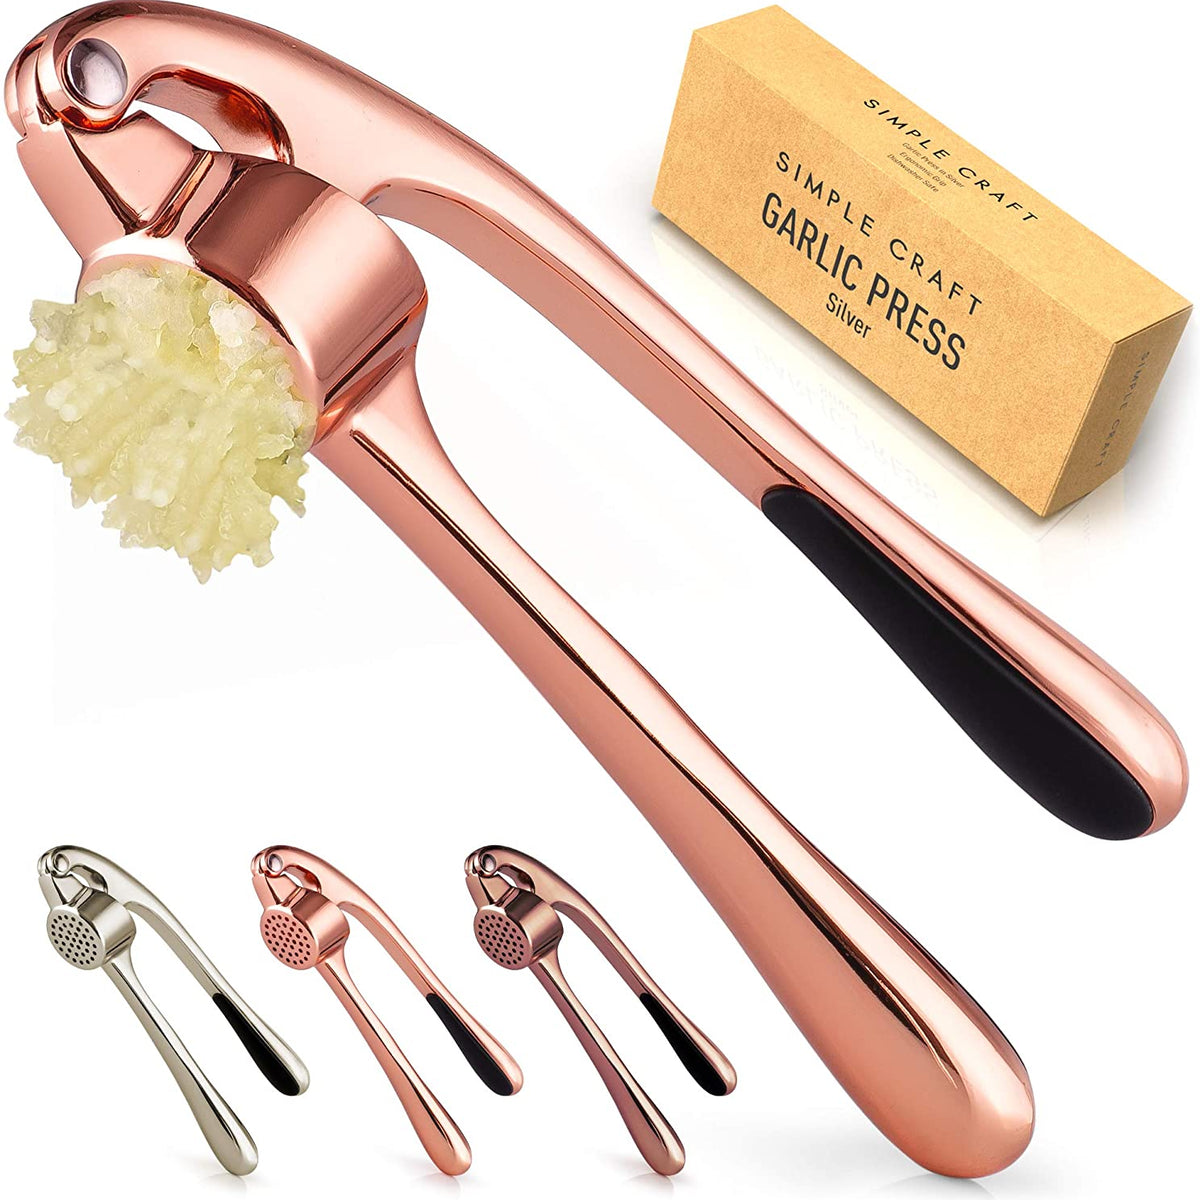 Aoibox 8.4 oz. Garlic Mincer Tool with Sturdy Design Extracts More Garlic Paste, Soft and Easy to Squeeze, Gold